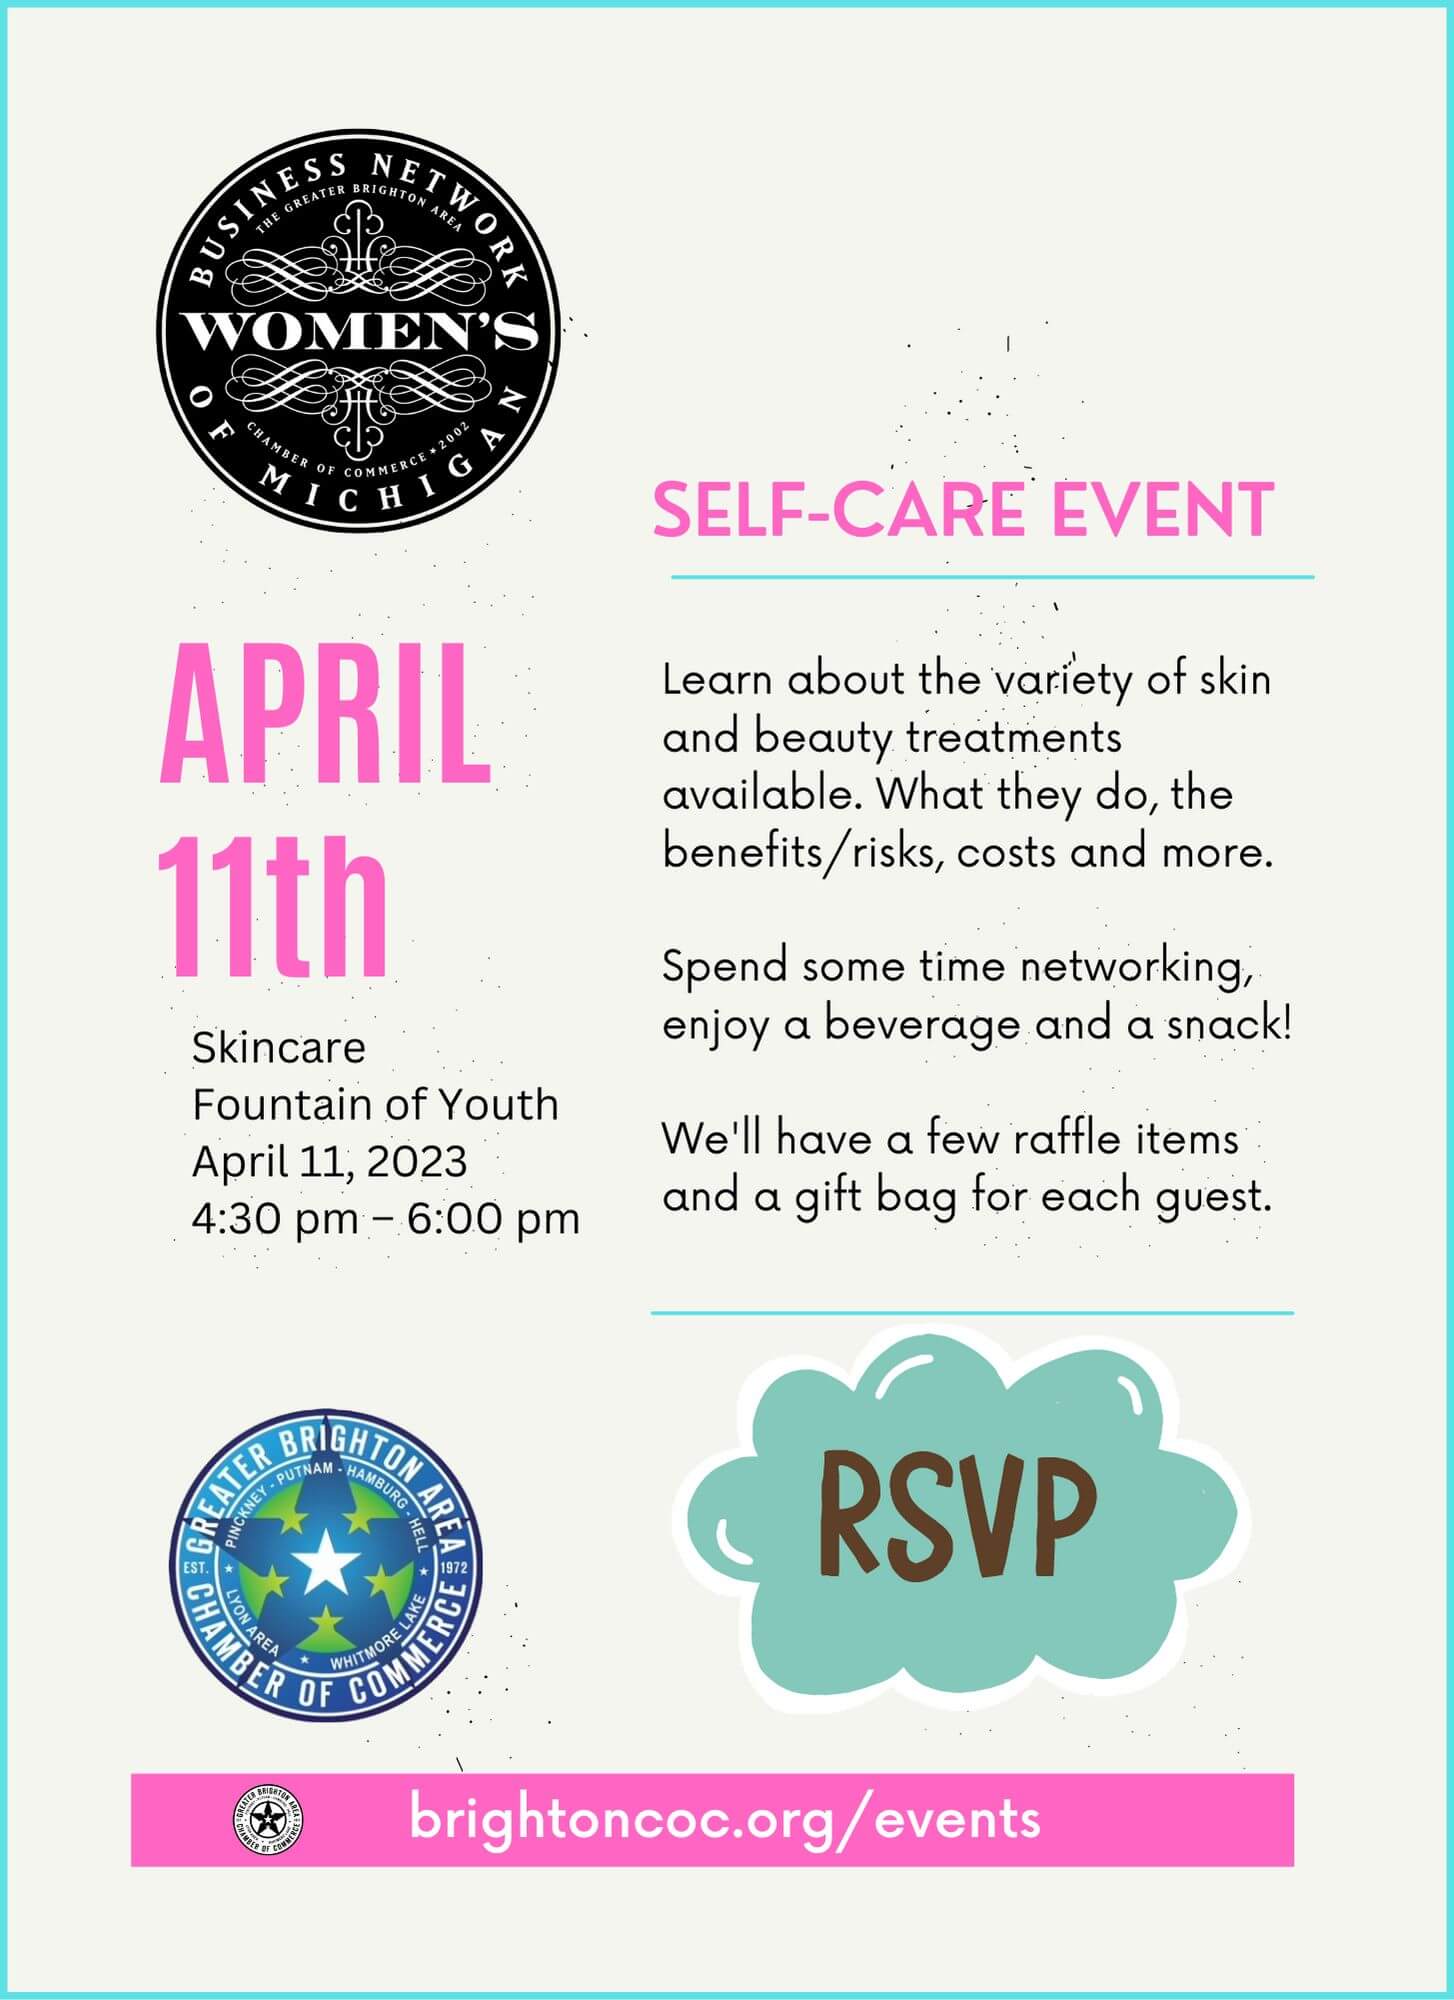 Copy of SELF-CARE EVENTS (4.25 × 4.25 in) (8 × 11 in) (1)